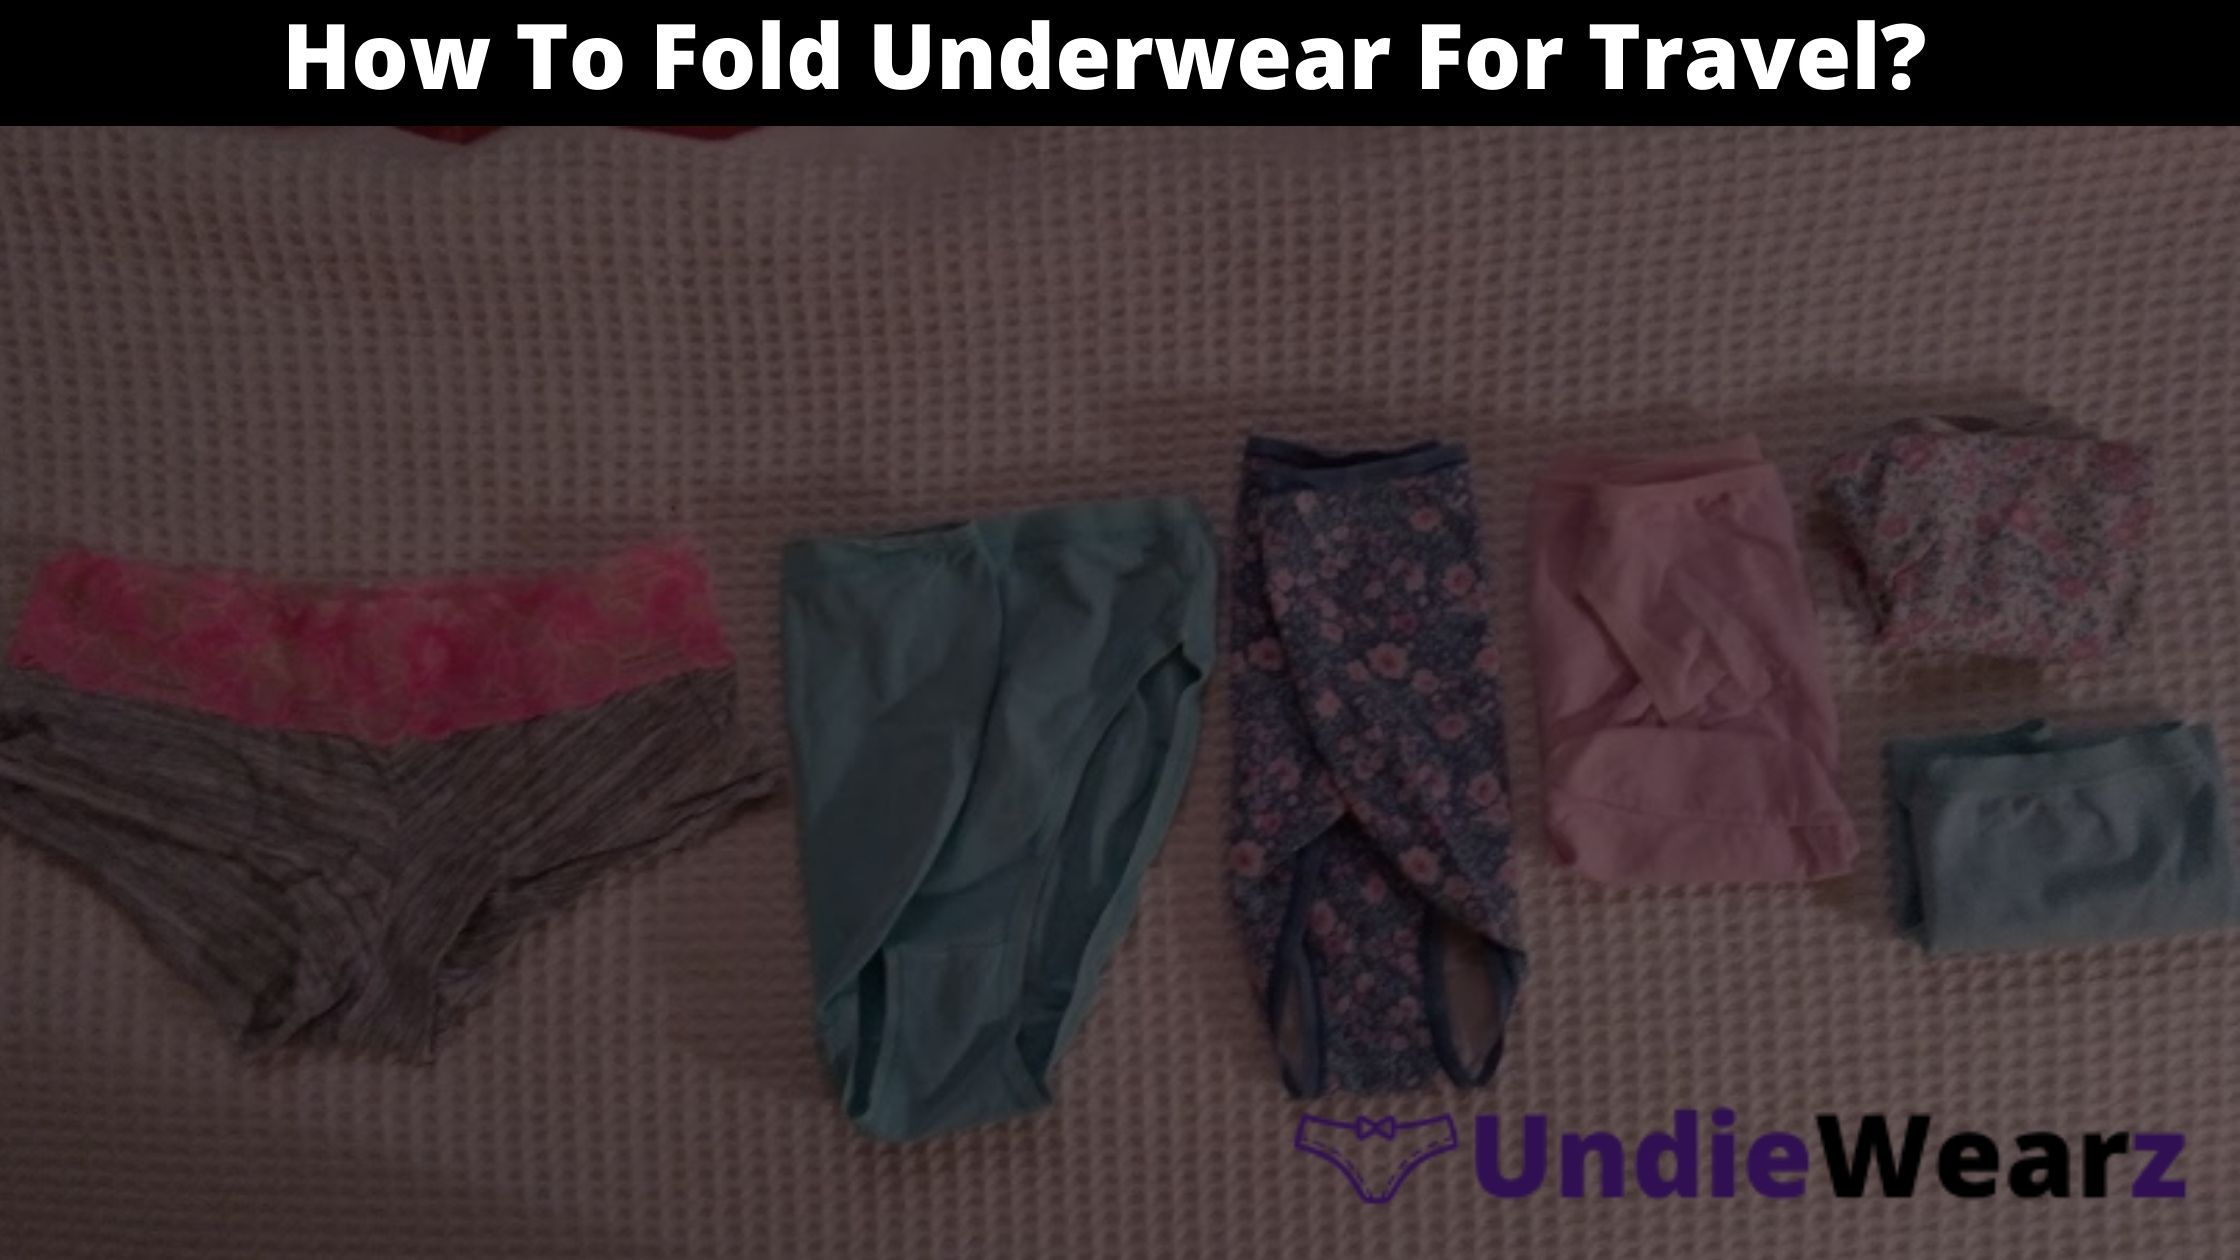 How To Fold Underwear For Travel